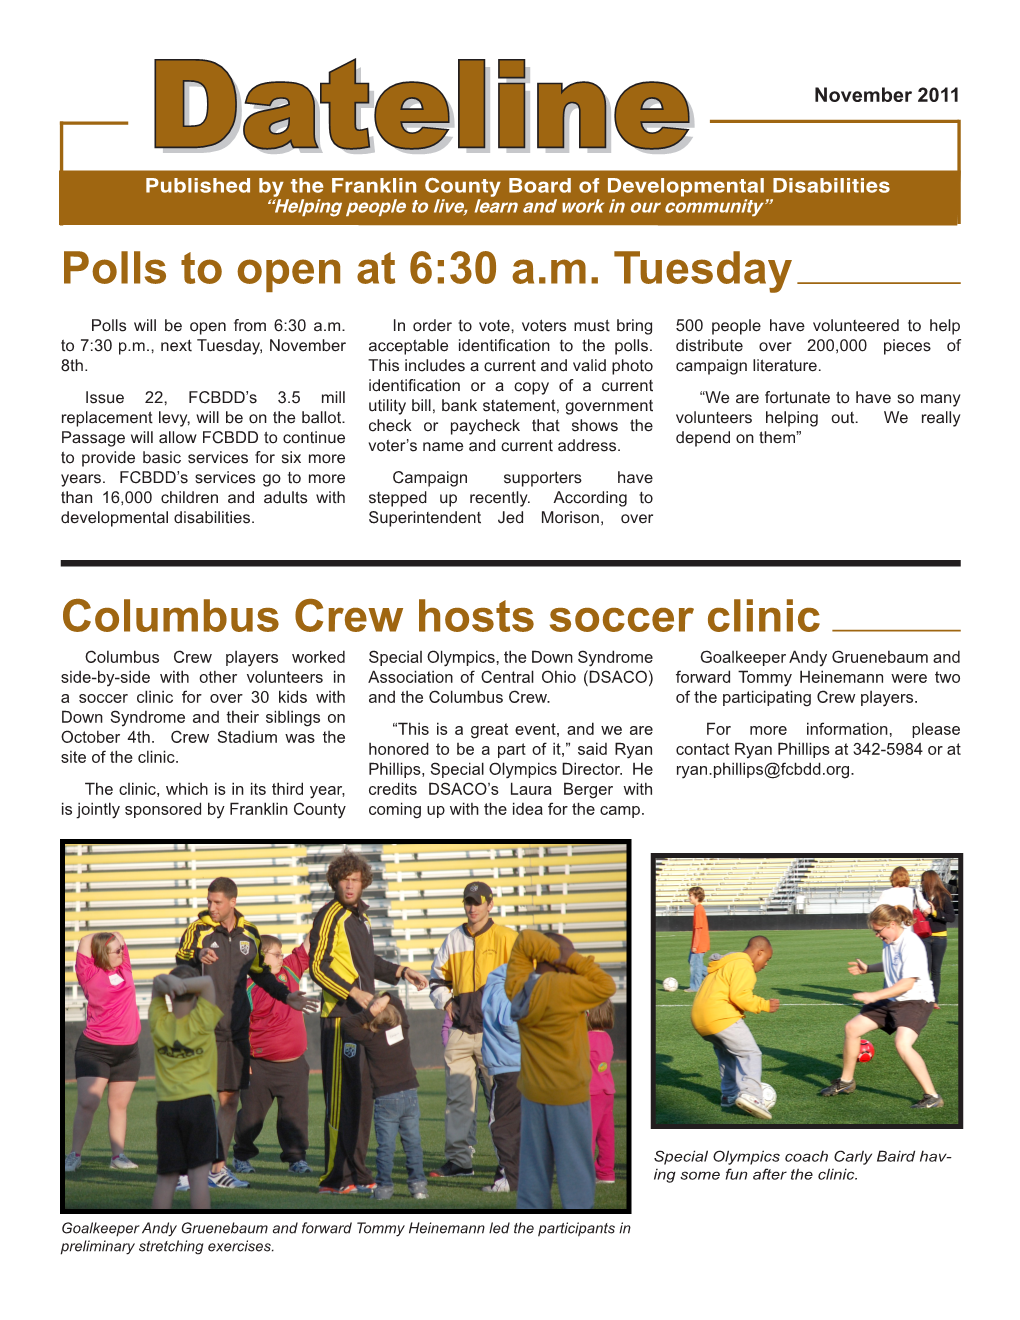 Polls to Open at 6:30 A.M. Tuesday Columbus Crew Hosts Soccer Clinic